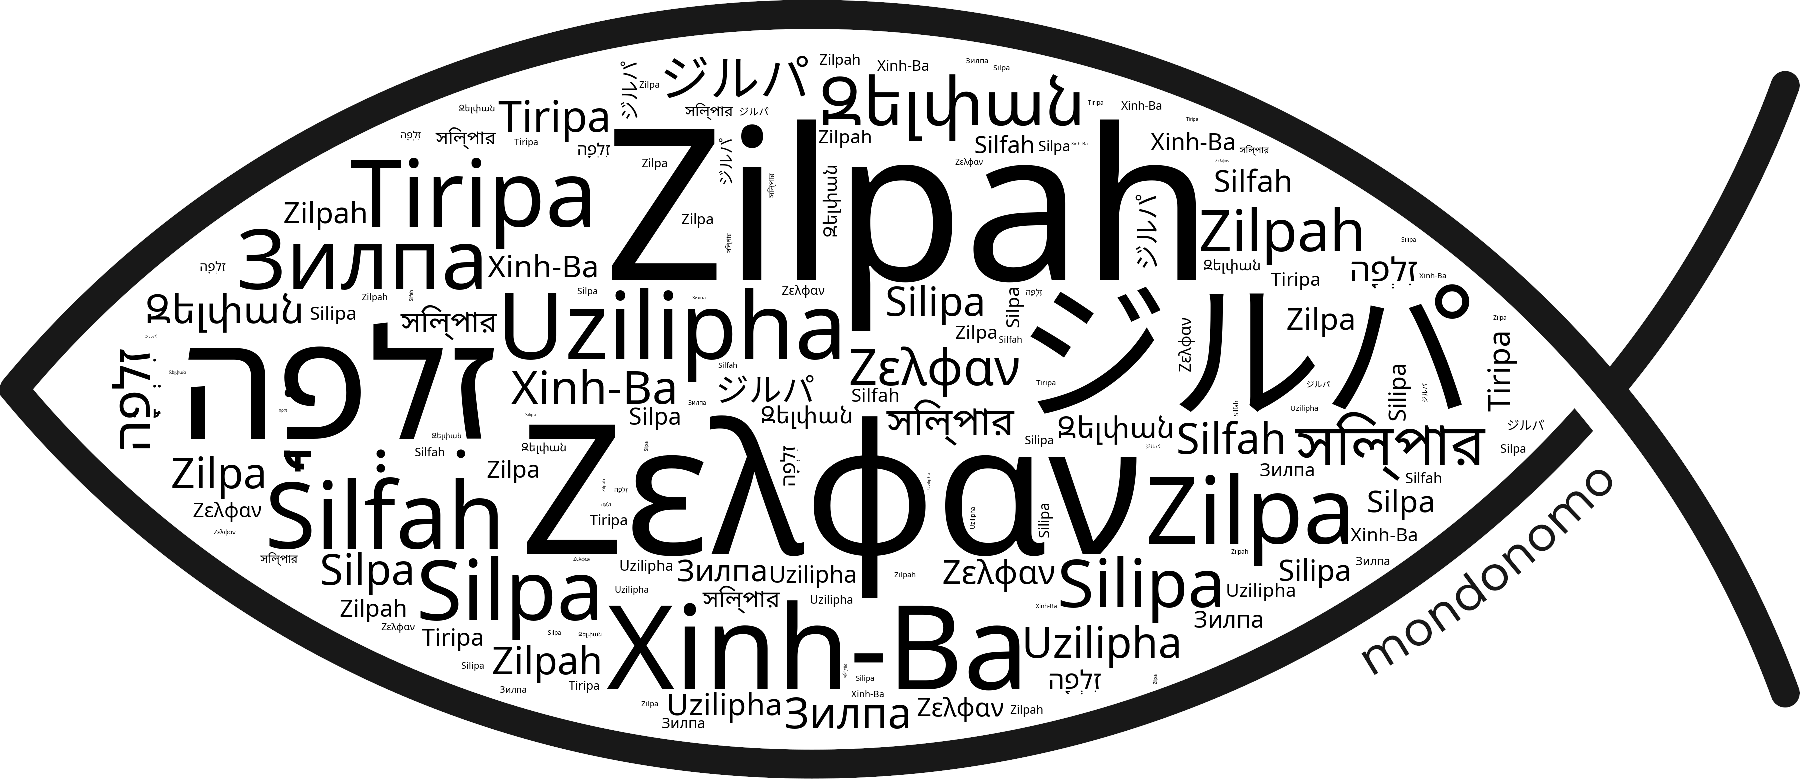 Name Zilpah in the world's Bibles